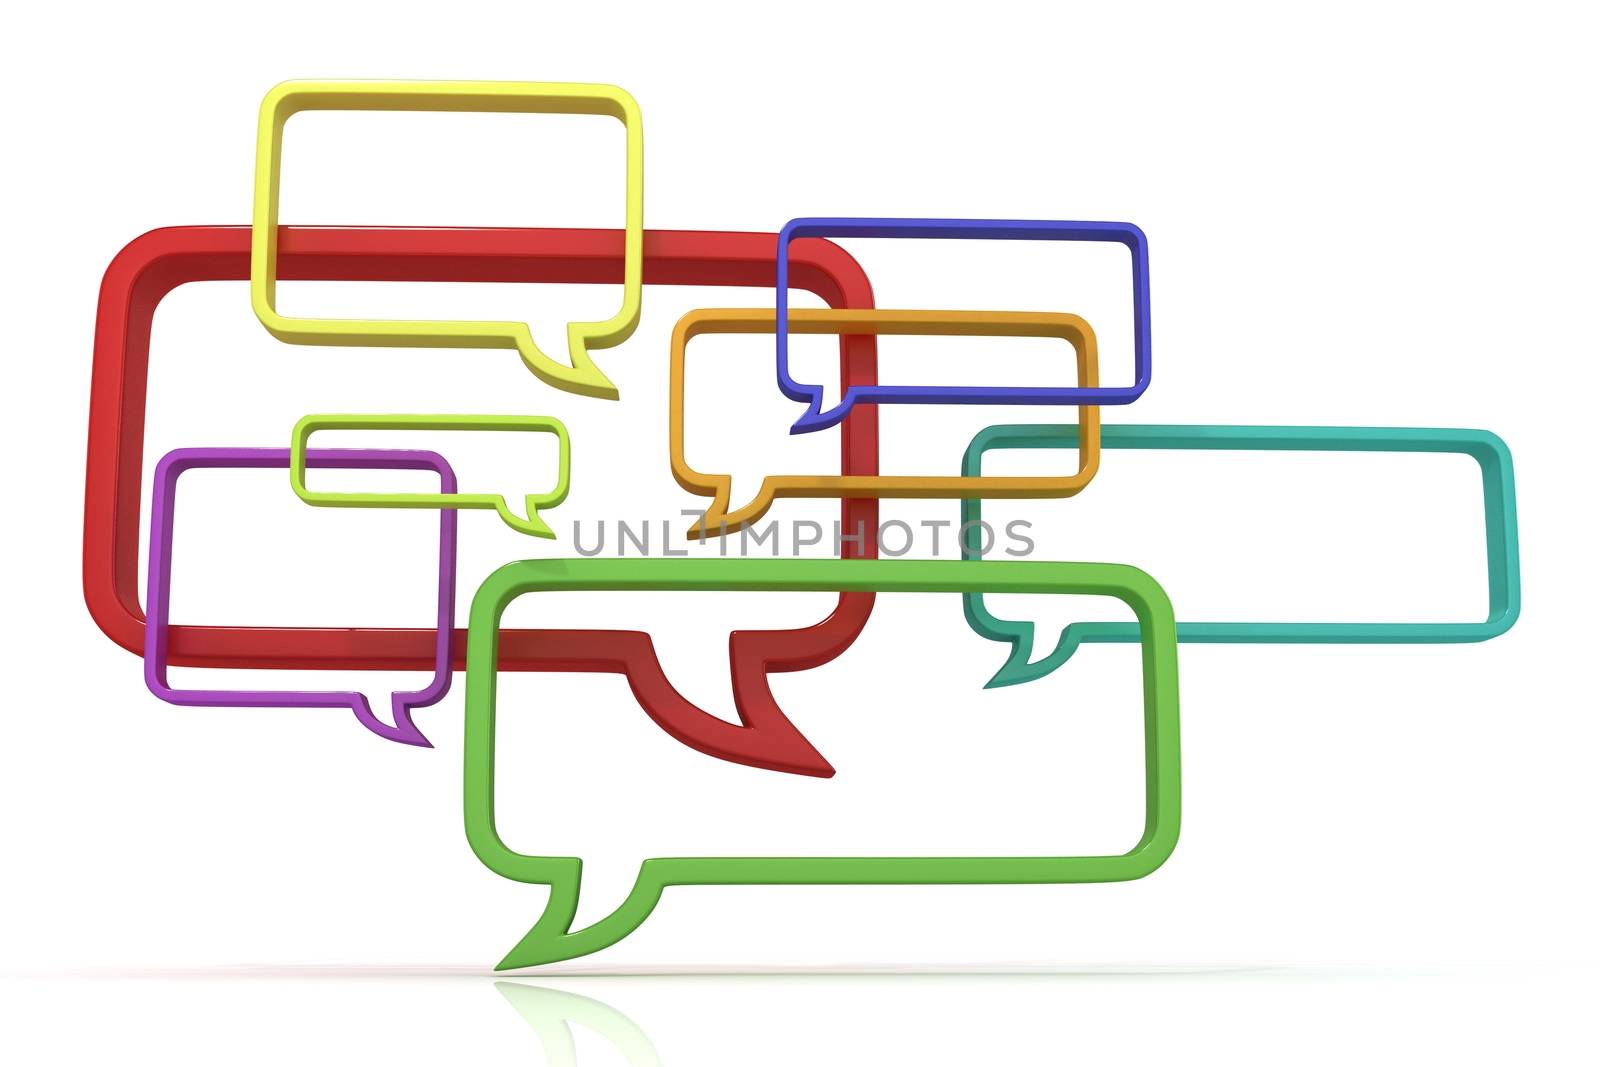 Conceptual 3D illustration of speech bubbles, isolated on white background. Front view